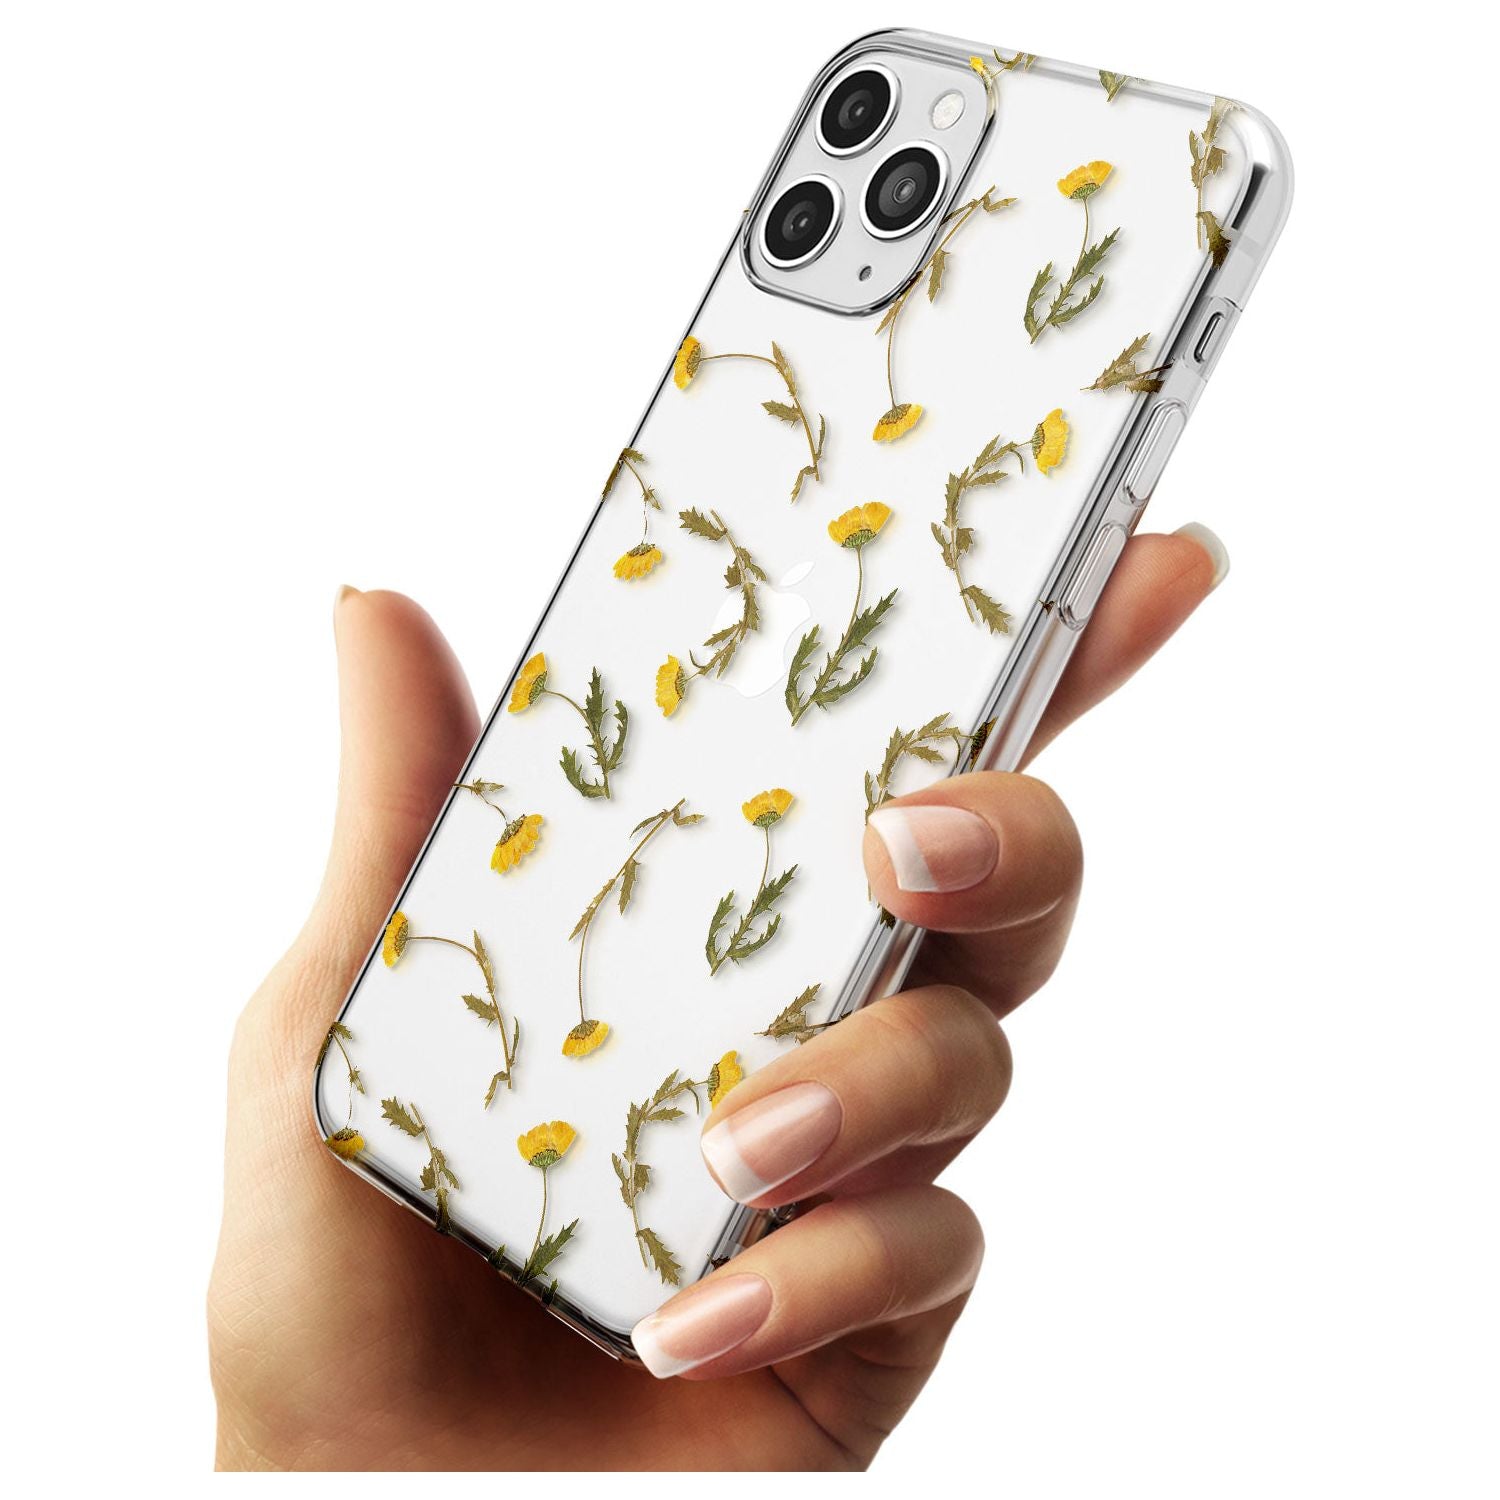 Long Stemmed Wildflowers - Dried Flower-Inspired Slim TPU Phone Case for iPhone 11 Pro Max